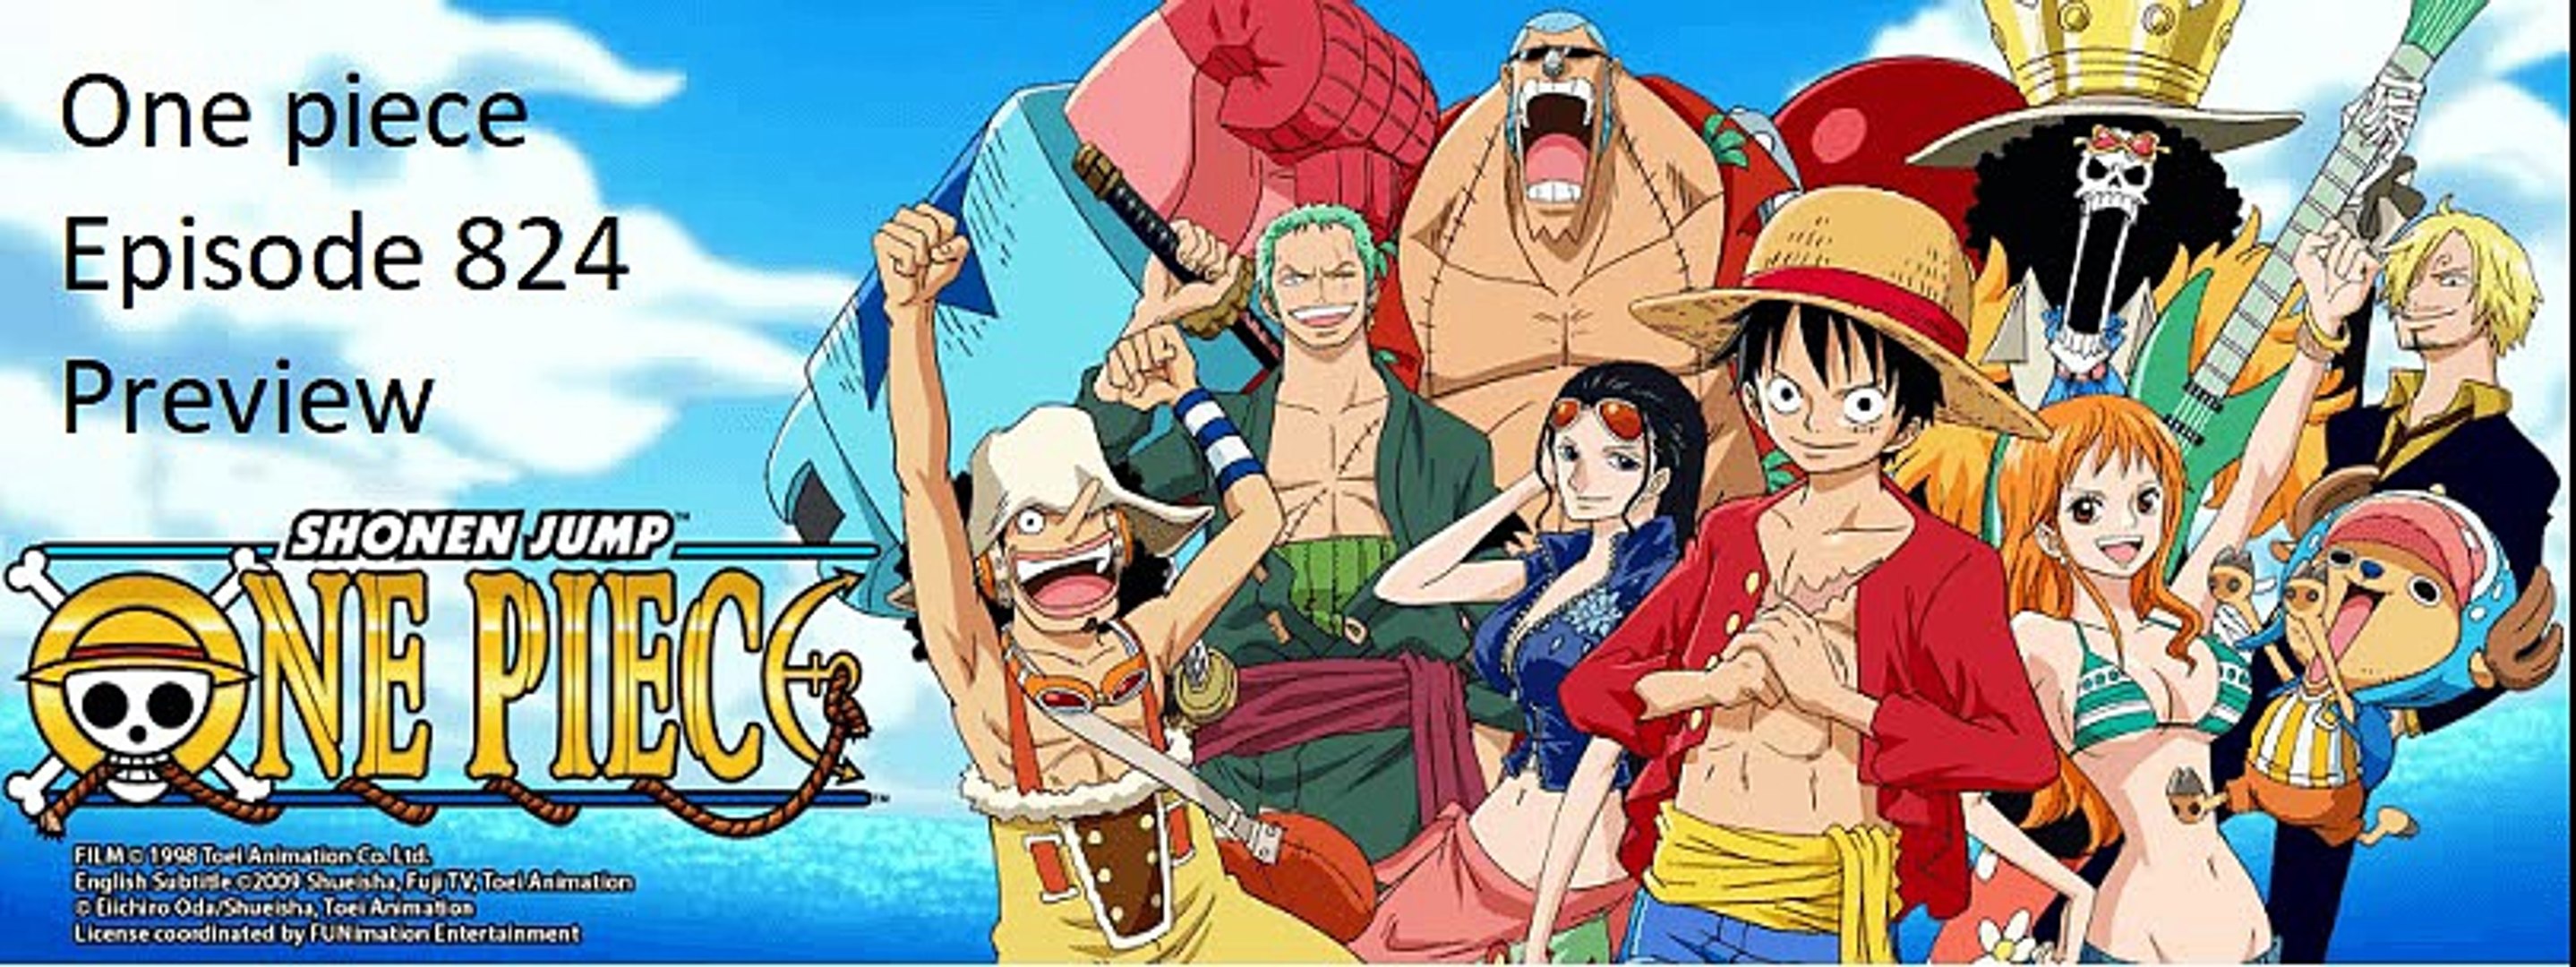 One Piece 4 Preview Eng Sub The Rendezvous Luffy Hd Video Dailymotion